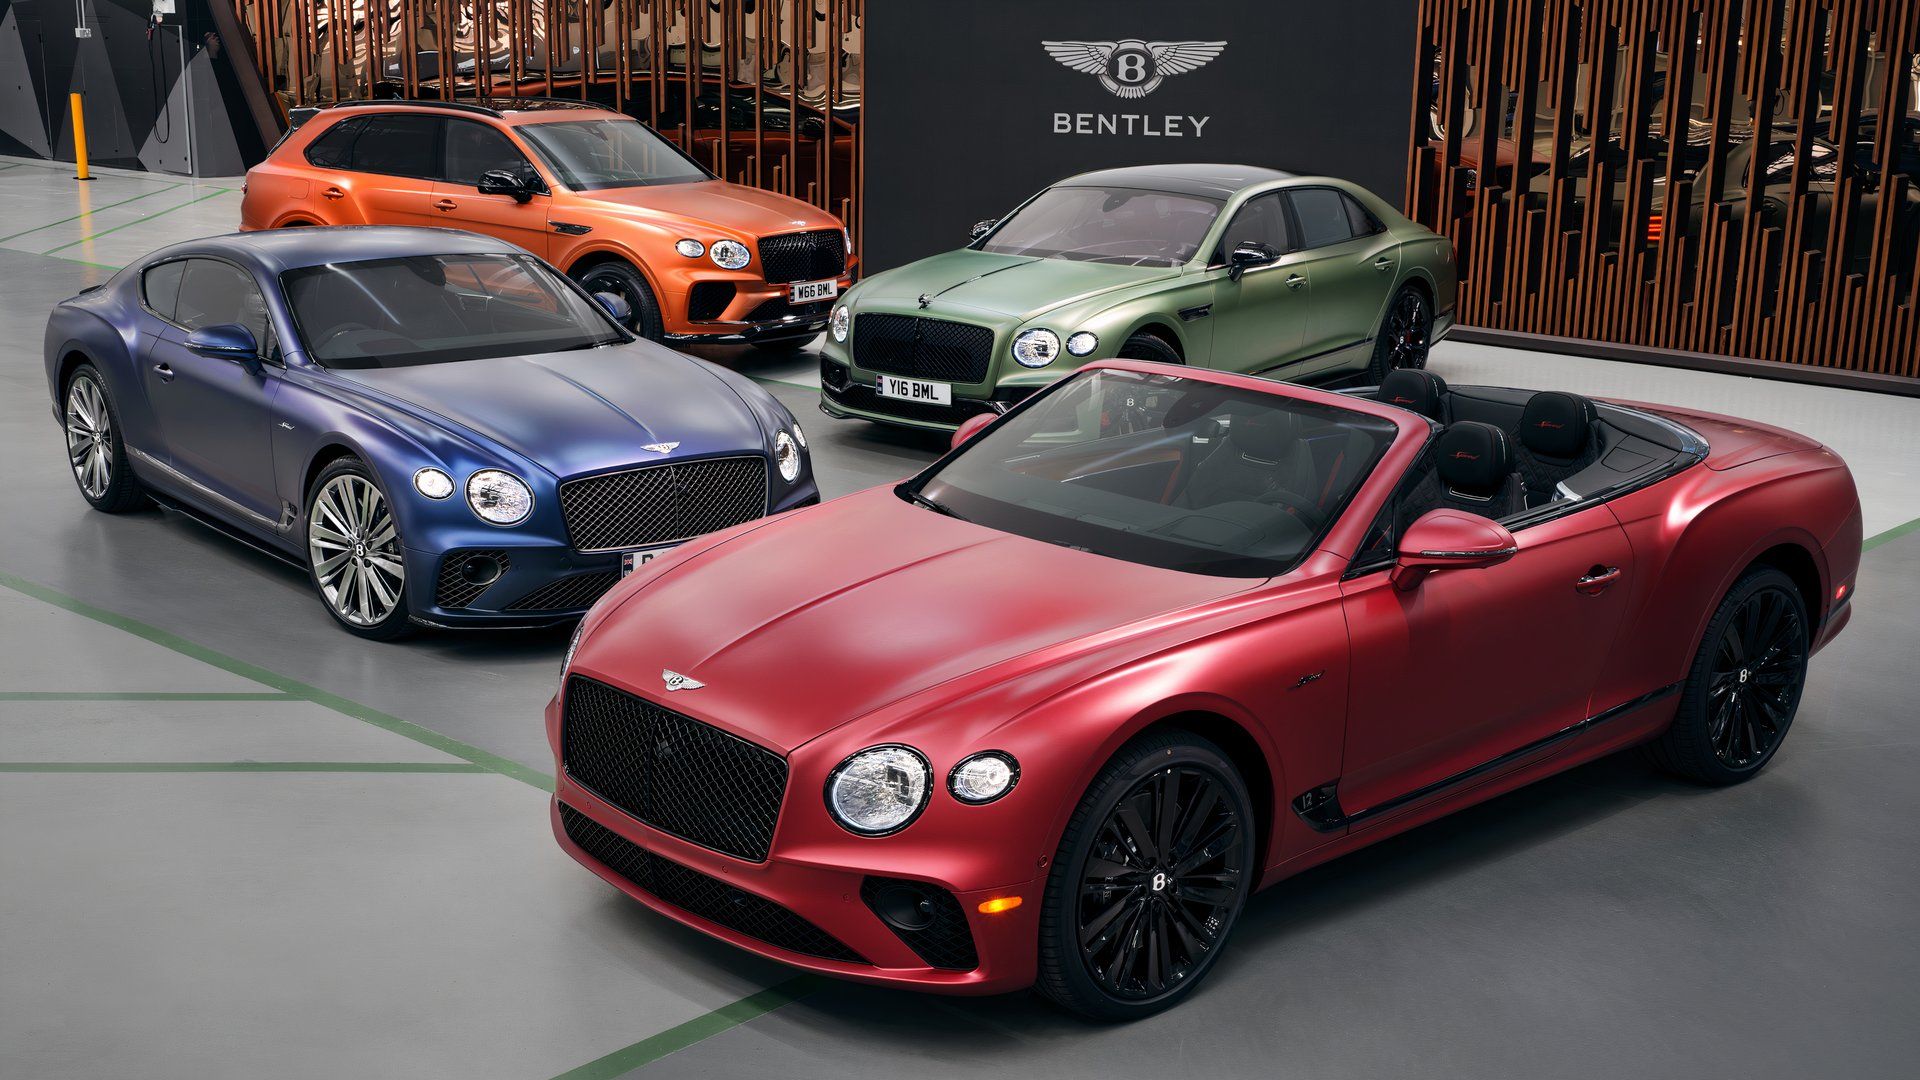 Bentley Adds 15 New Ways To Customize Your Luxury Car